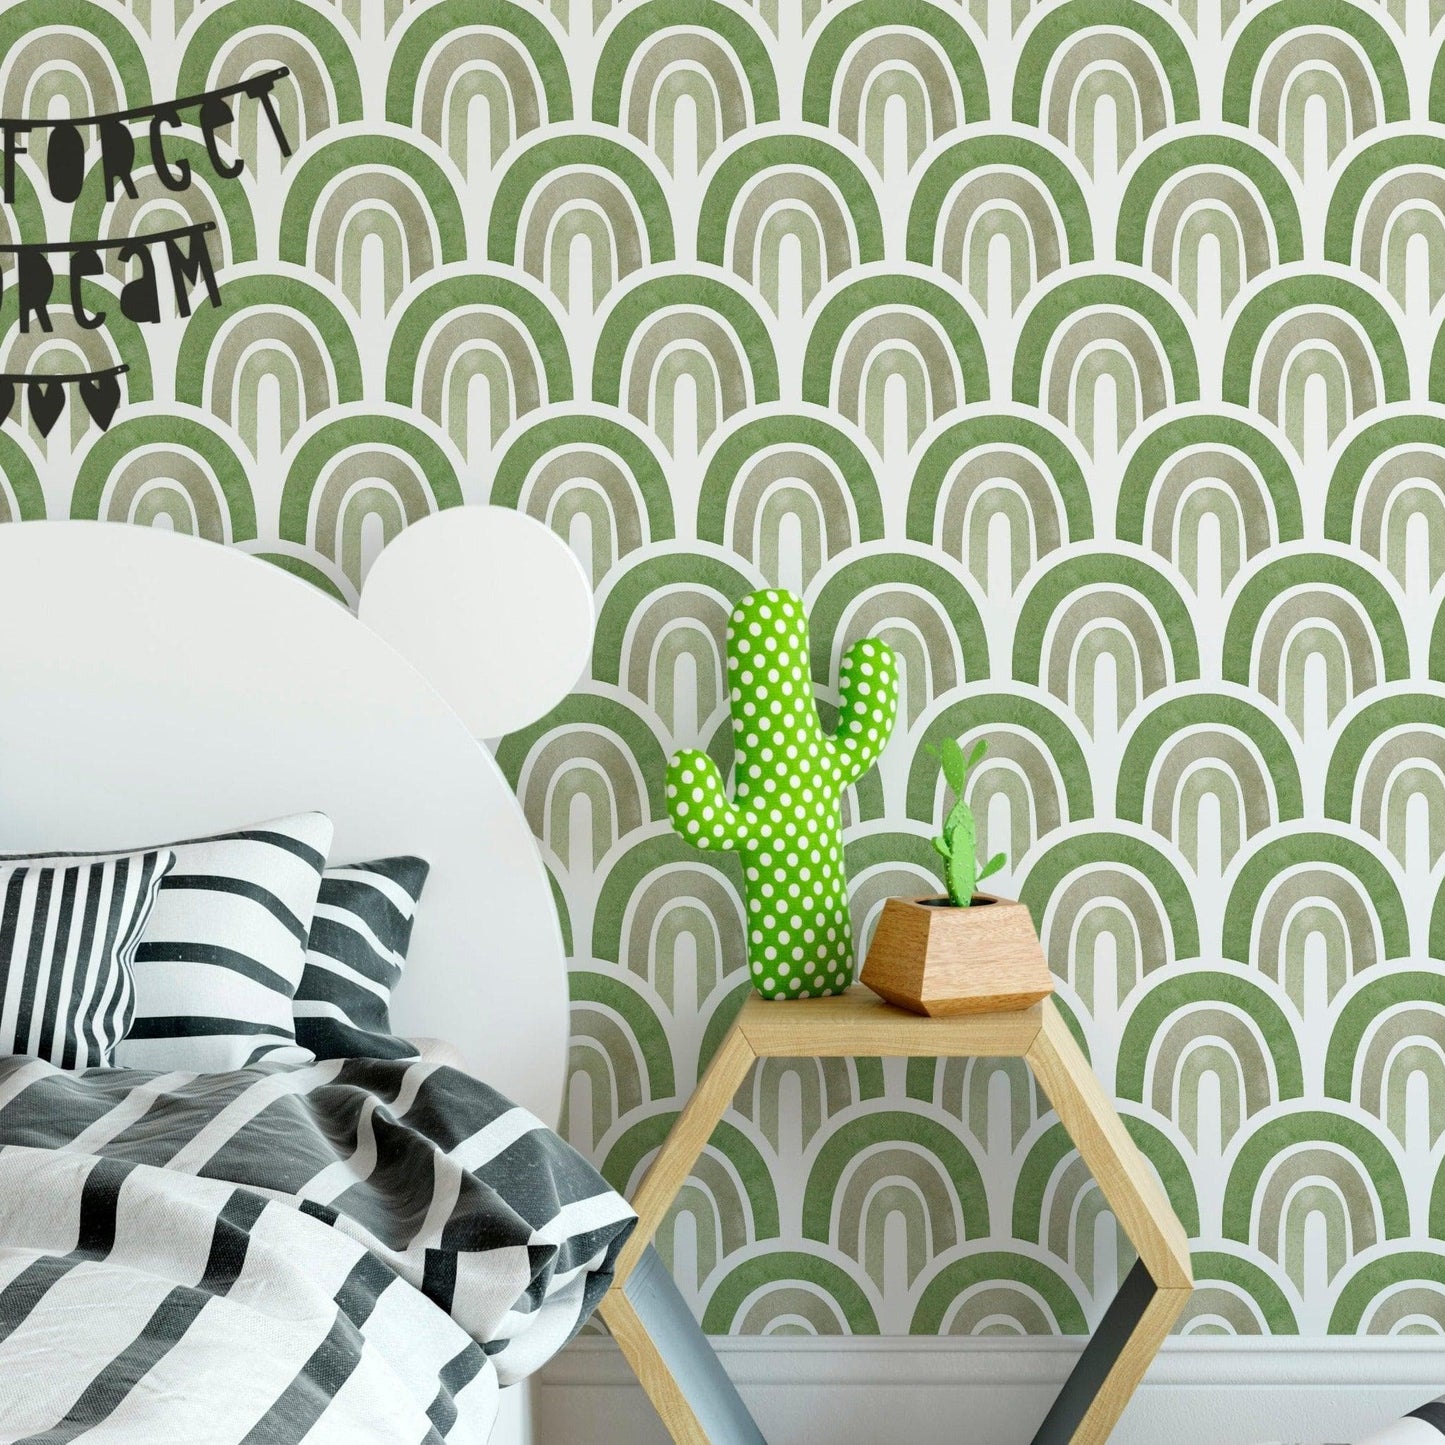 Minimalistic Doodles Forest Trees Removable Wallpaper Minimalistic Doodles Forest Trees Removable Wallpaper Green Waves Boho Style Self Adhesive Wallpaper 